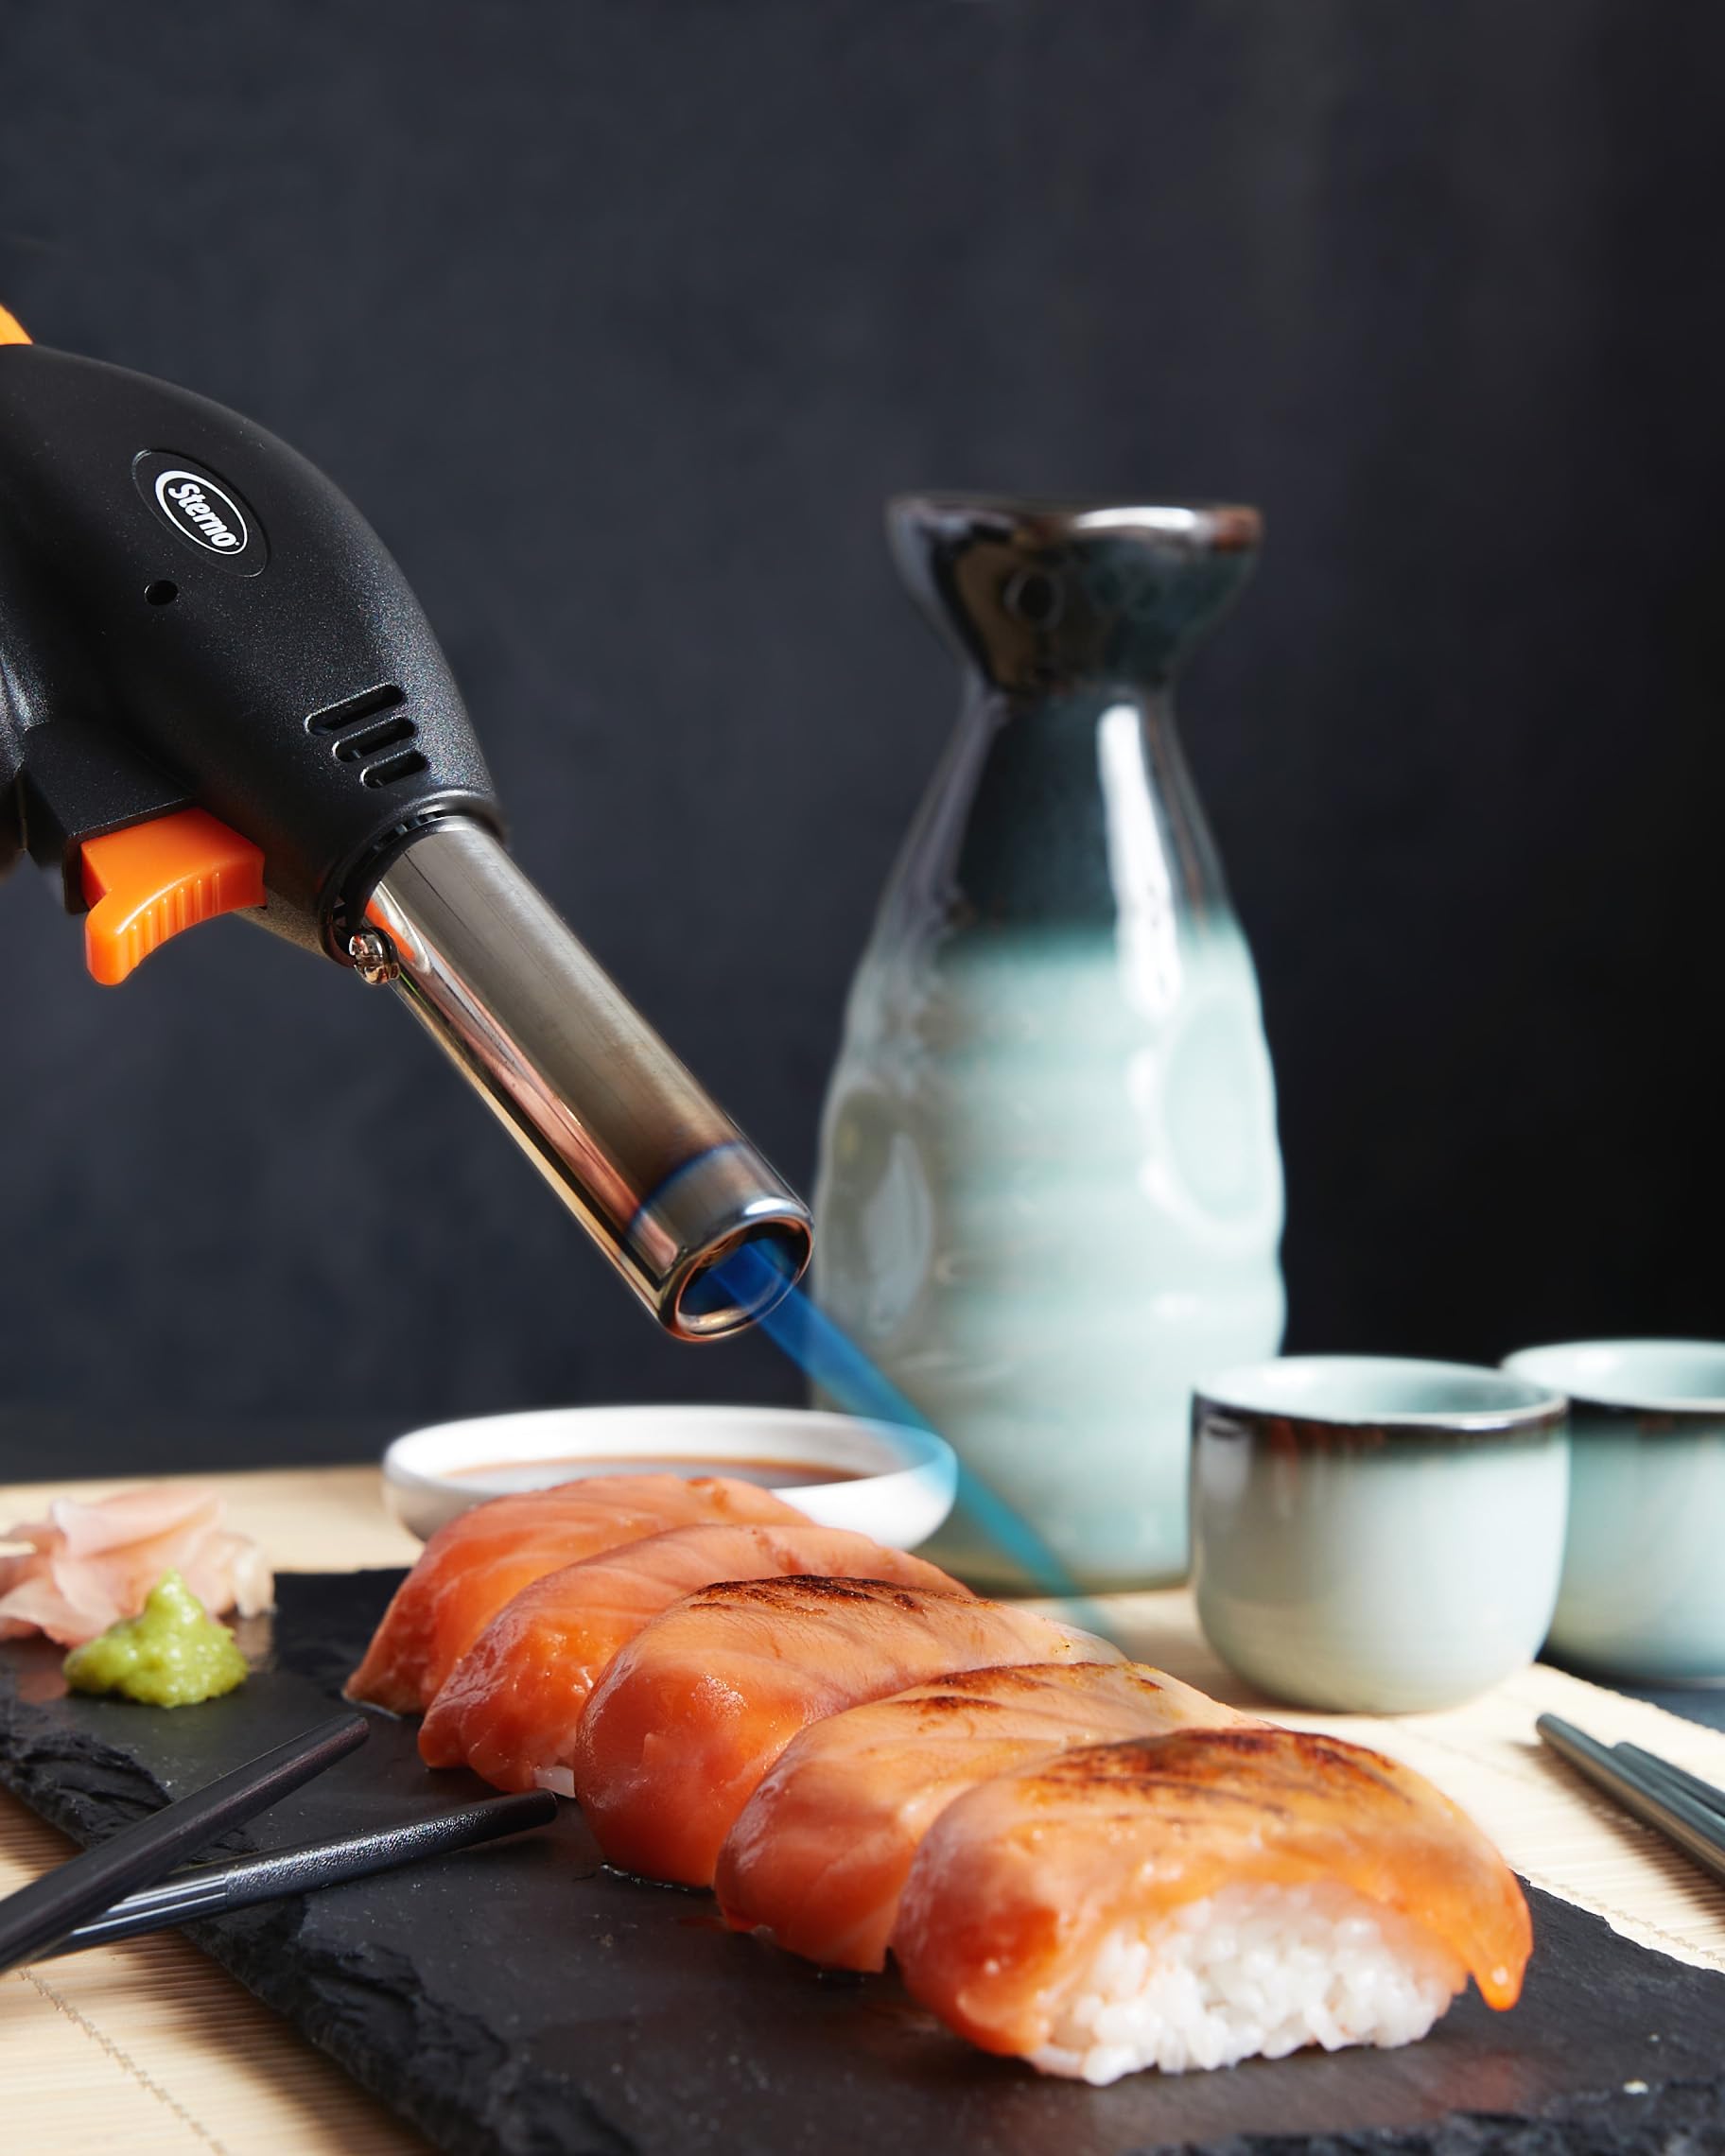 Sterno Butane Fuel Cooking Torch With Adjustable Dial, Anti-Flare, & Automatic Safety Shut-Off Sensor